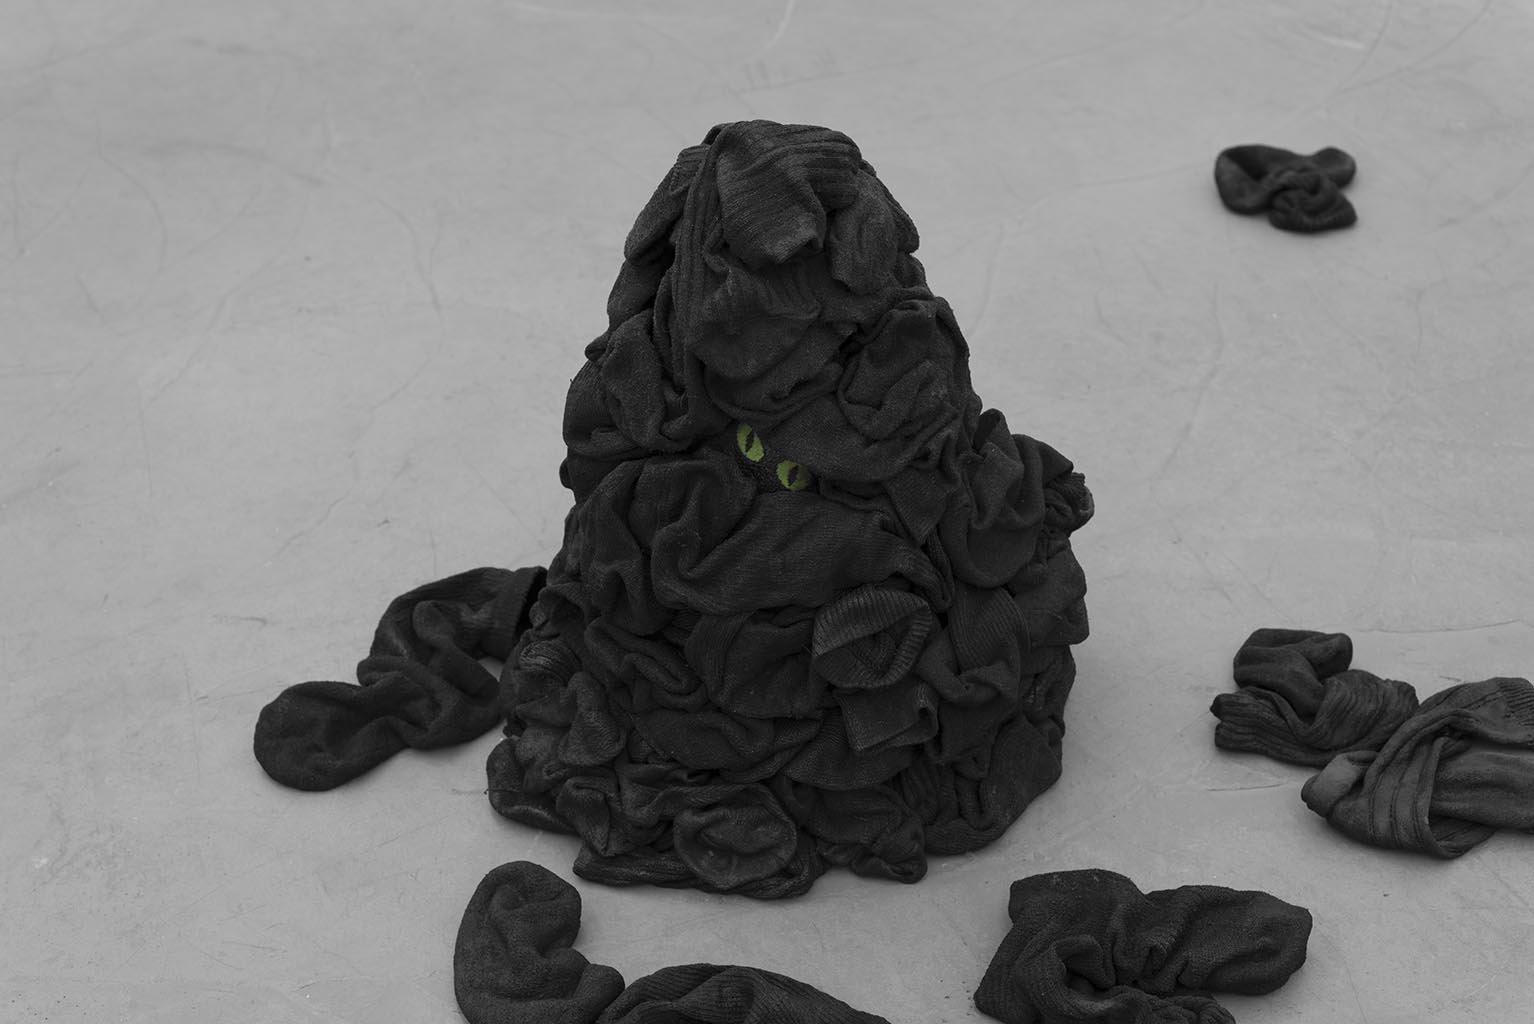 Pile, 2015, gesso, acrylic paint, fabric stiffener, dress socks, dimensions variable